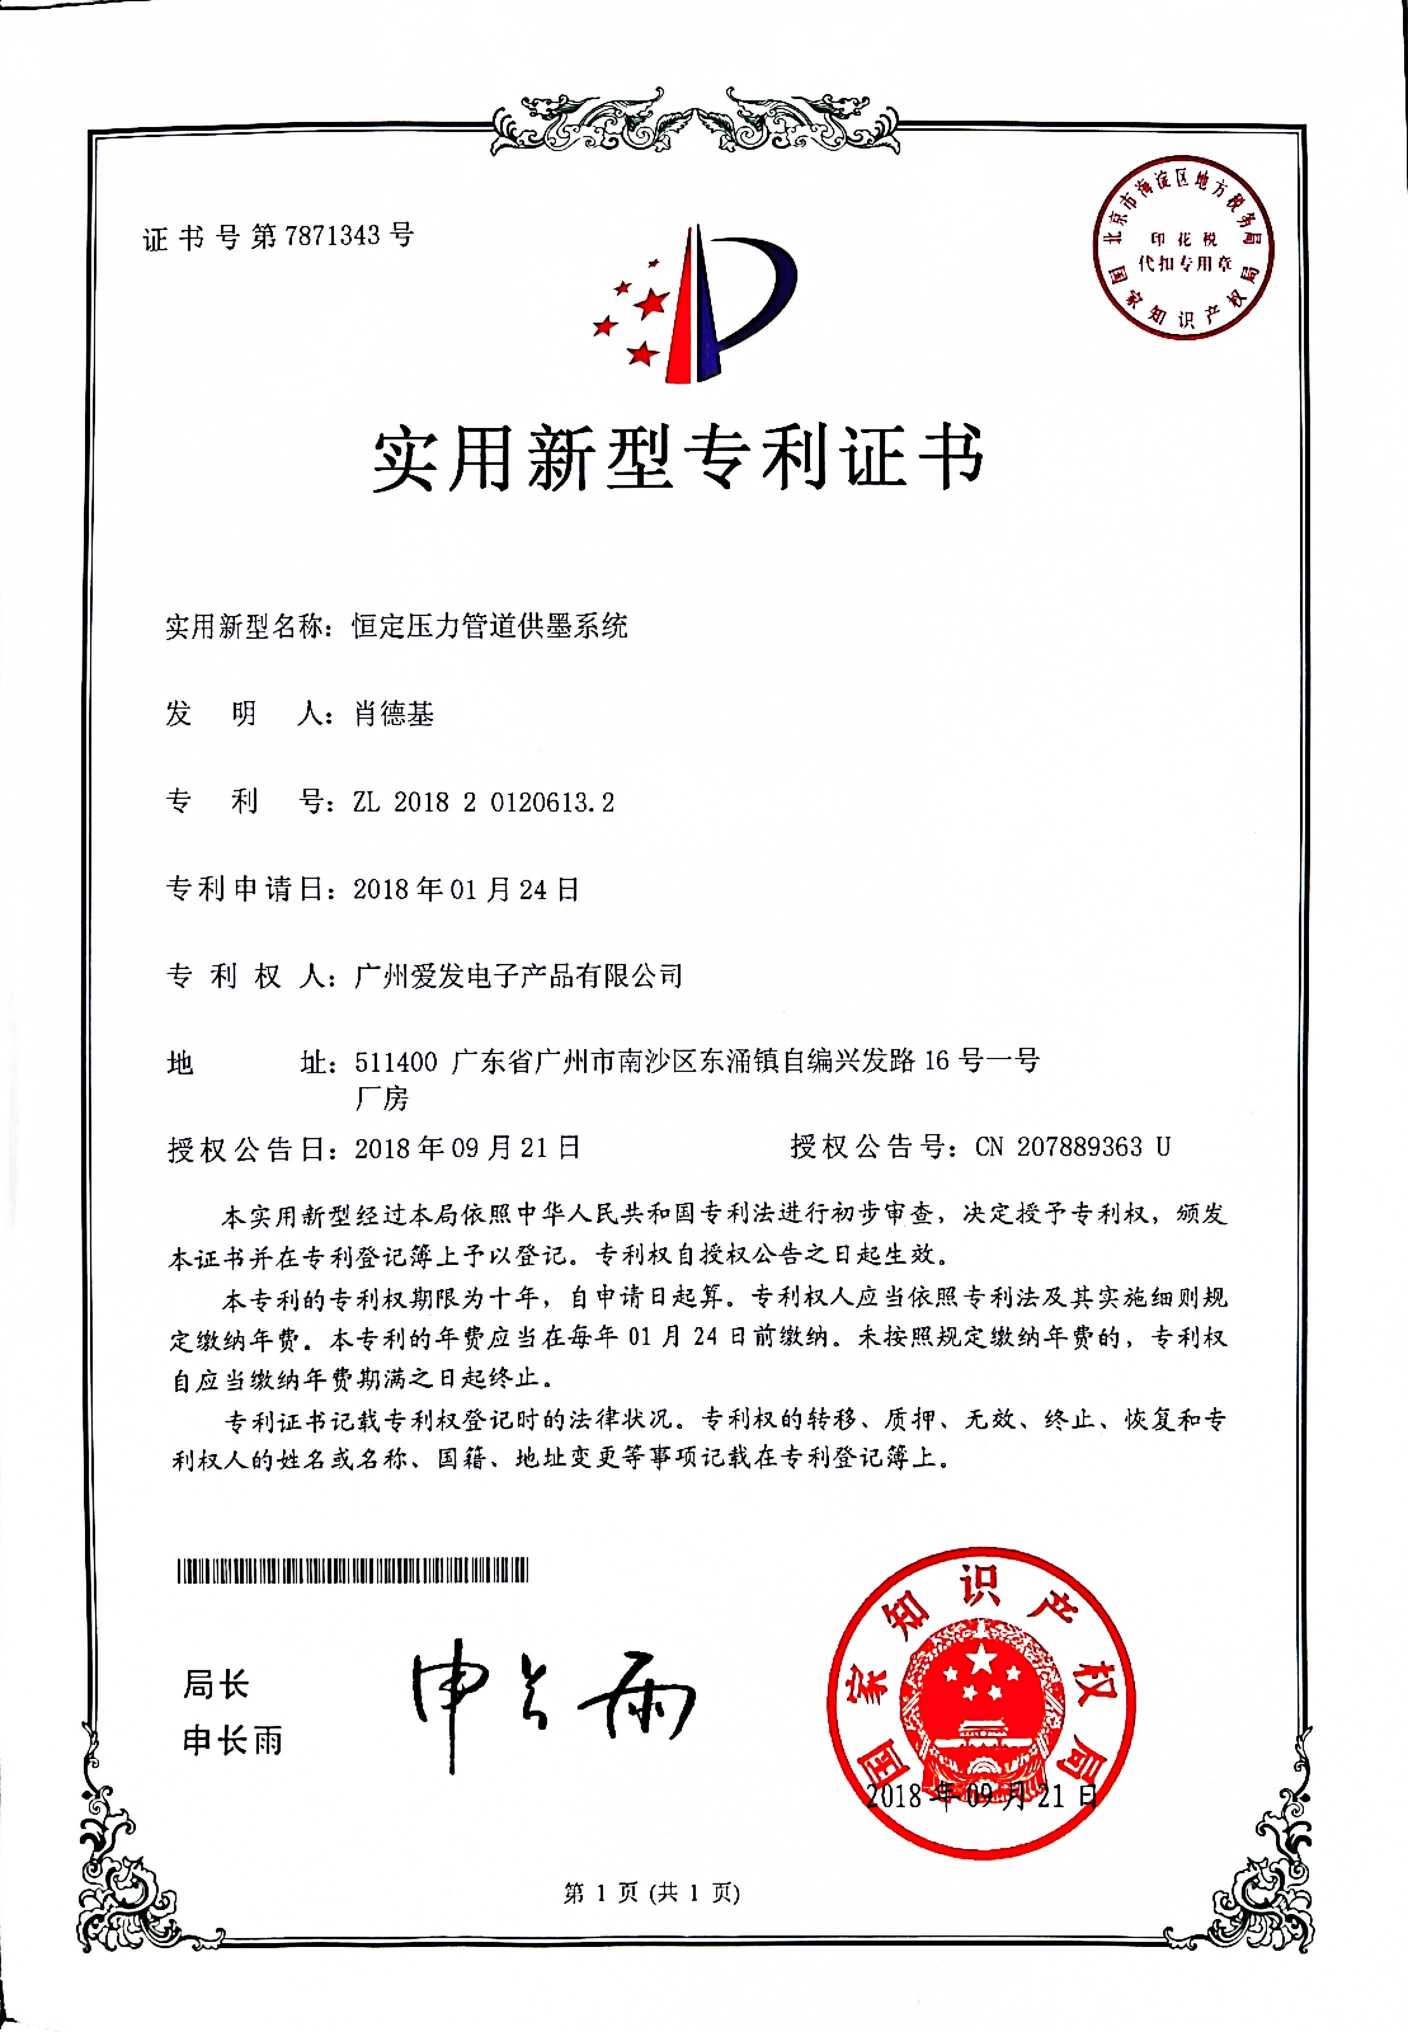 Patent Invention Certificate